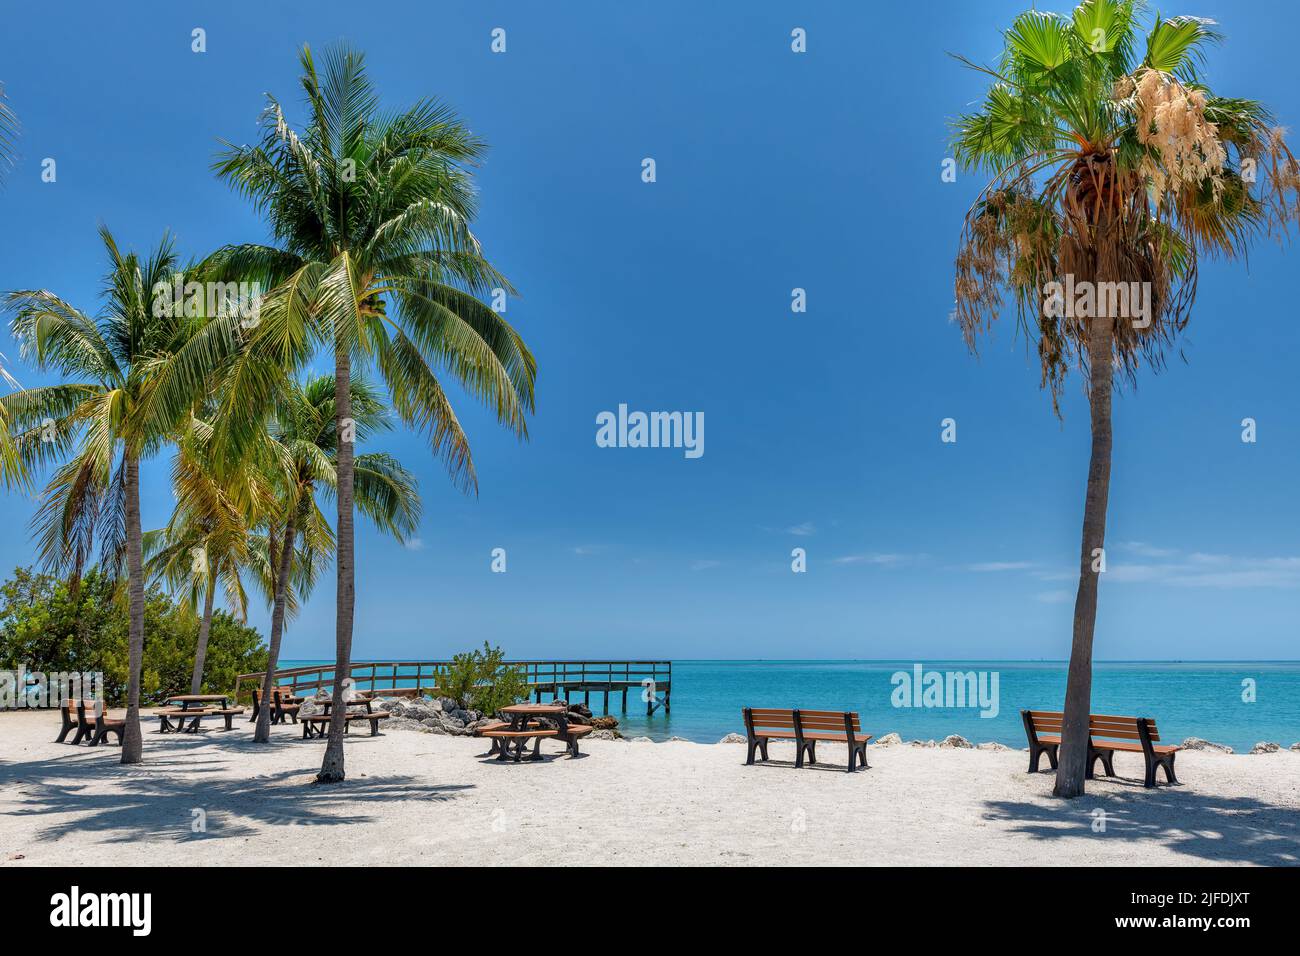 Palm trees in sunset beach state park in tropical island in Florida Keys Stock Photo